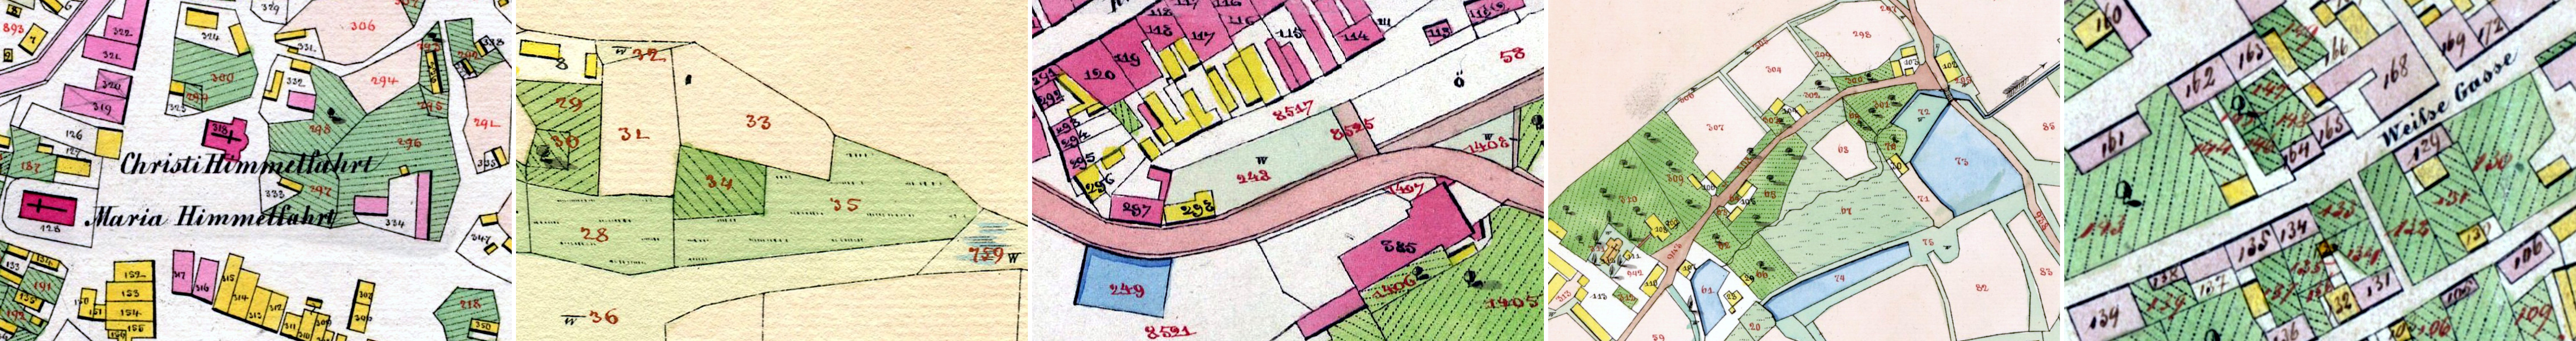 parcel numbering on late-stage cadastral maps